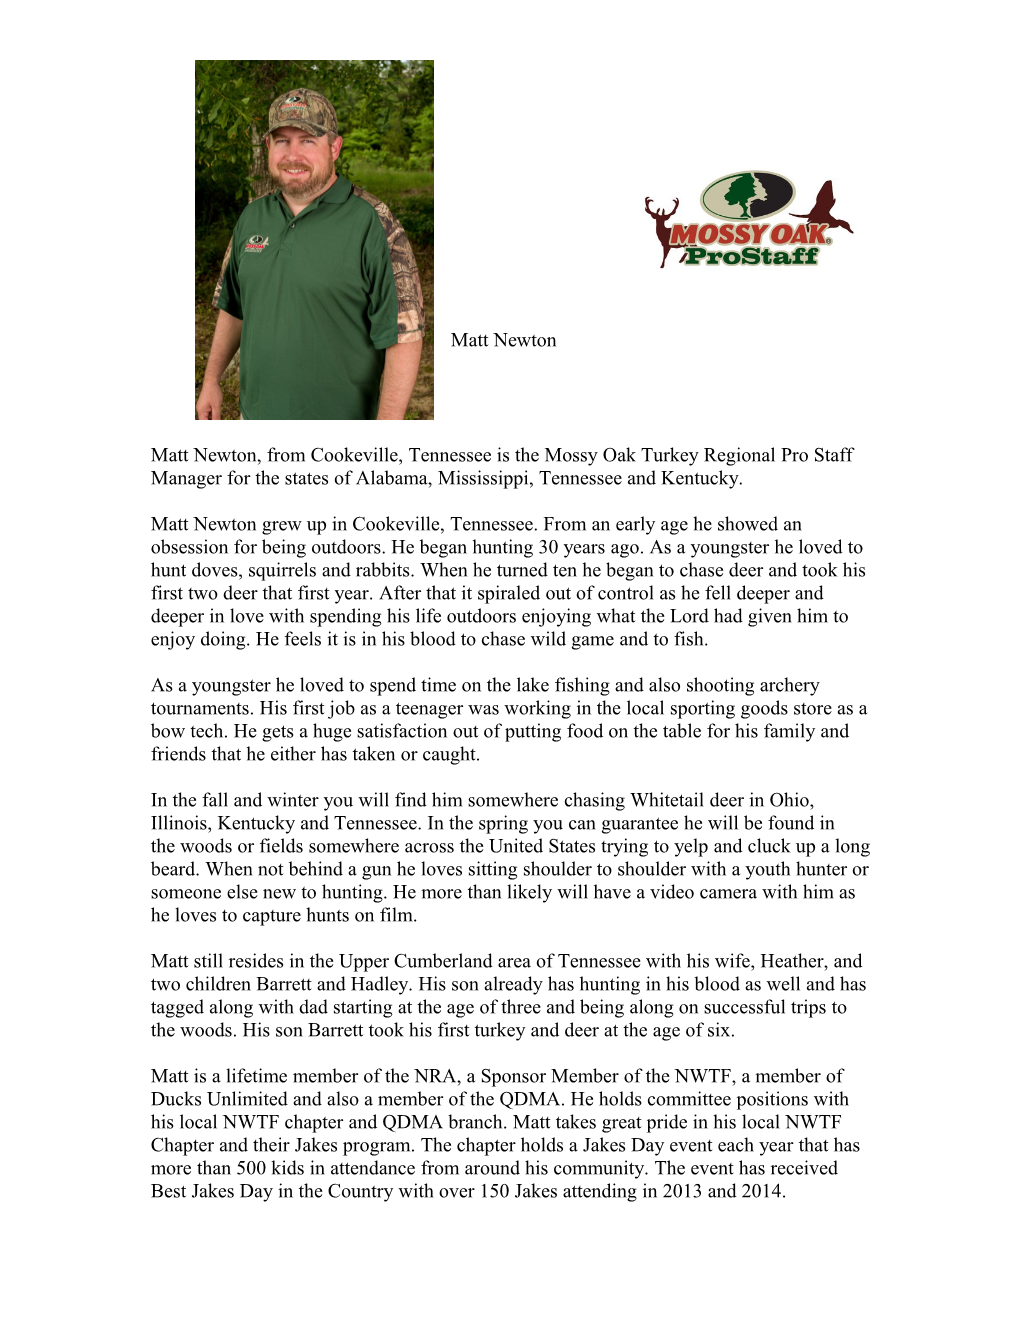 Matt Newton, from Cookeville, Tennessee Is the Mossy Oak Turkey Regional Pro Staff Manager